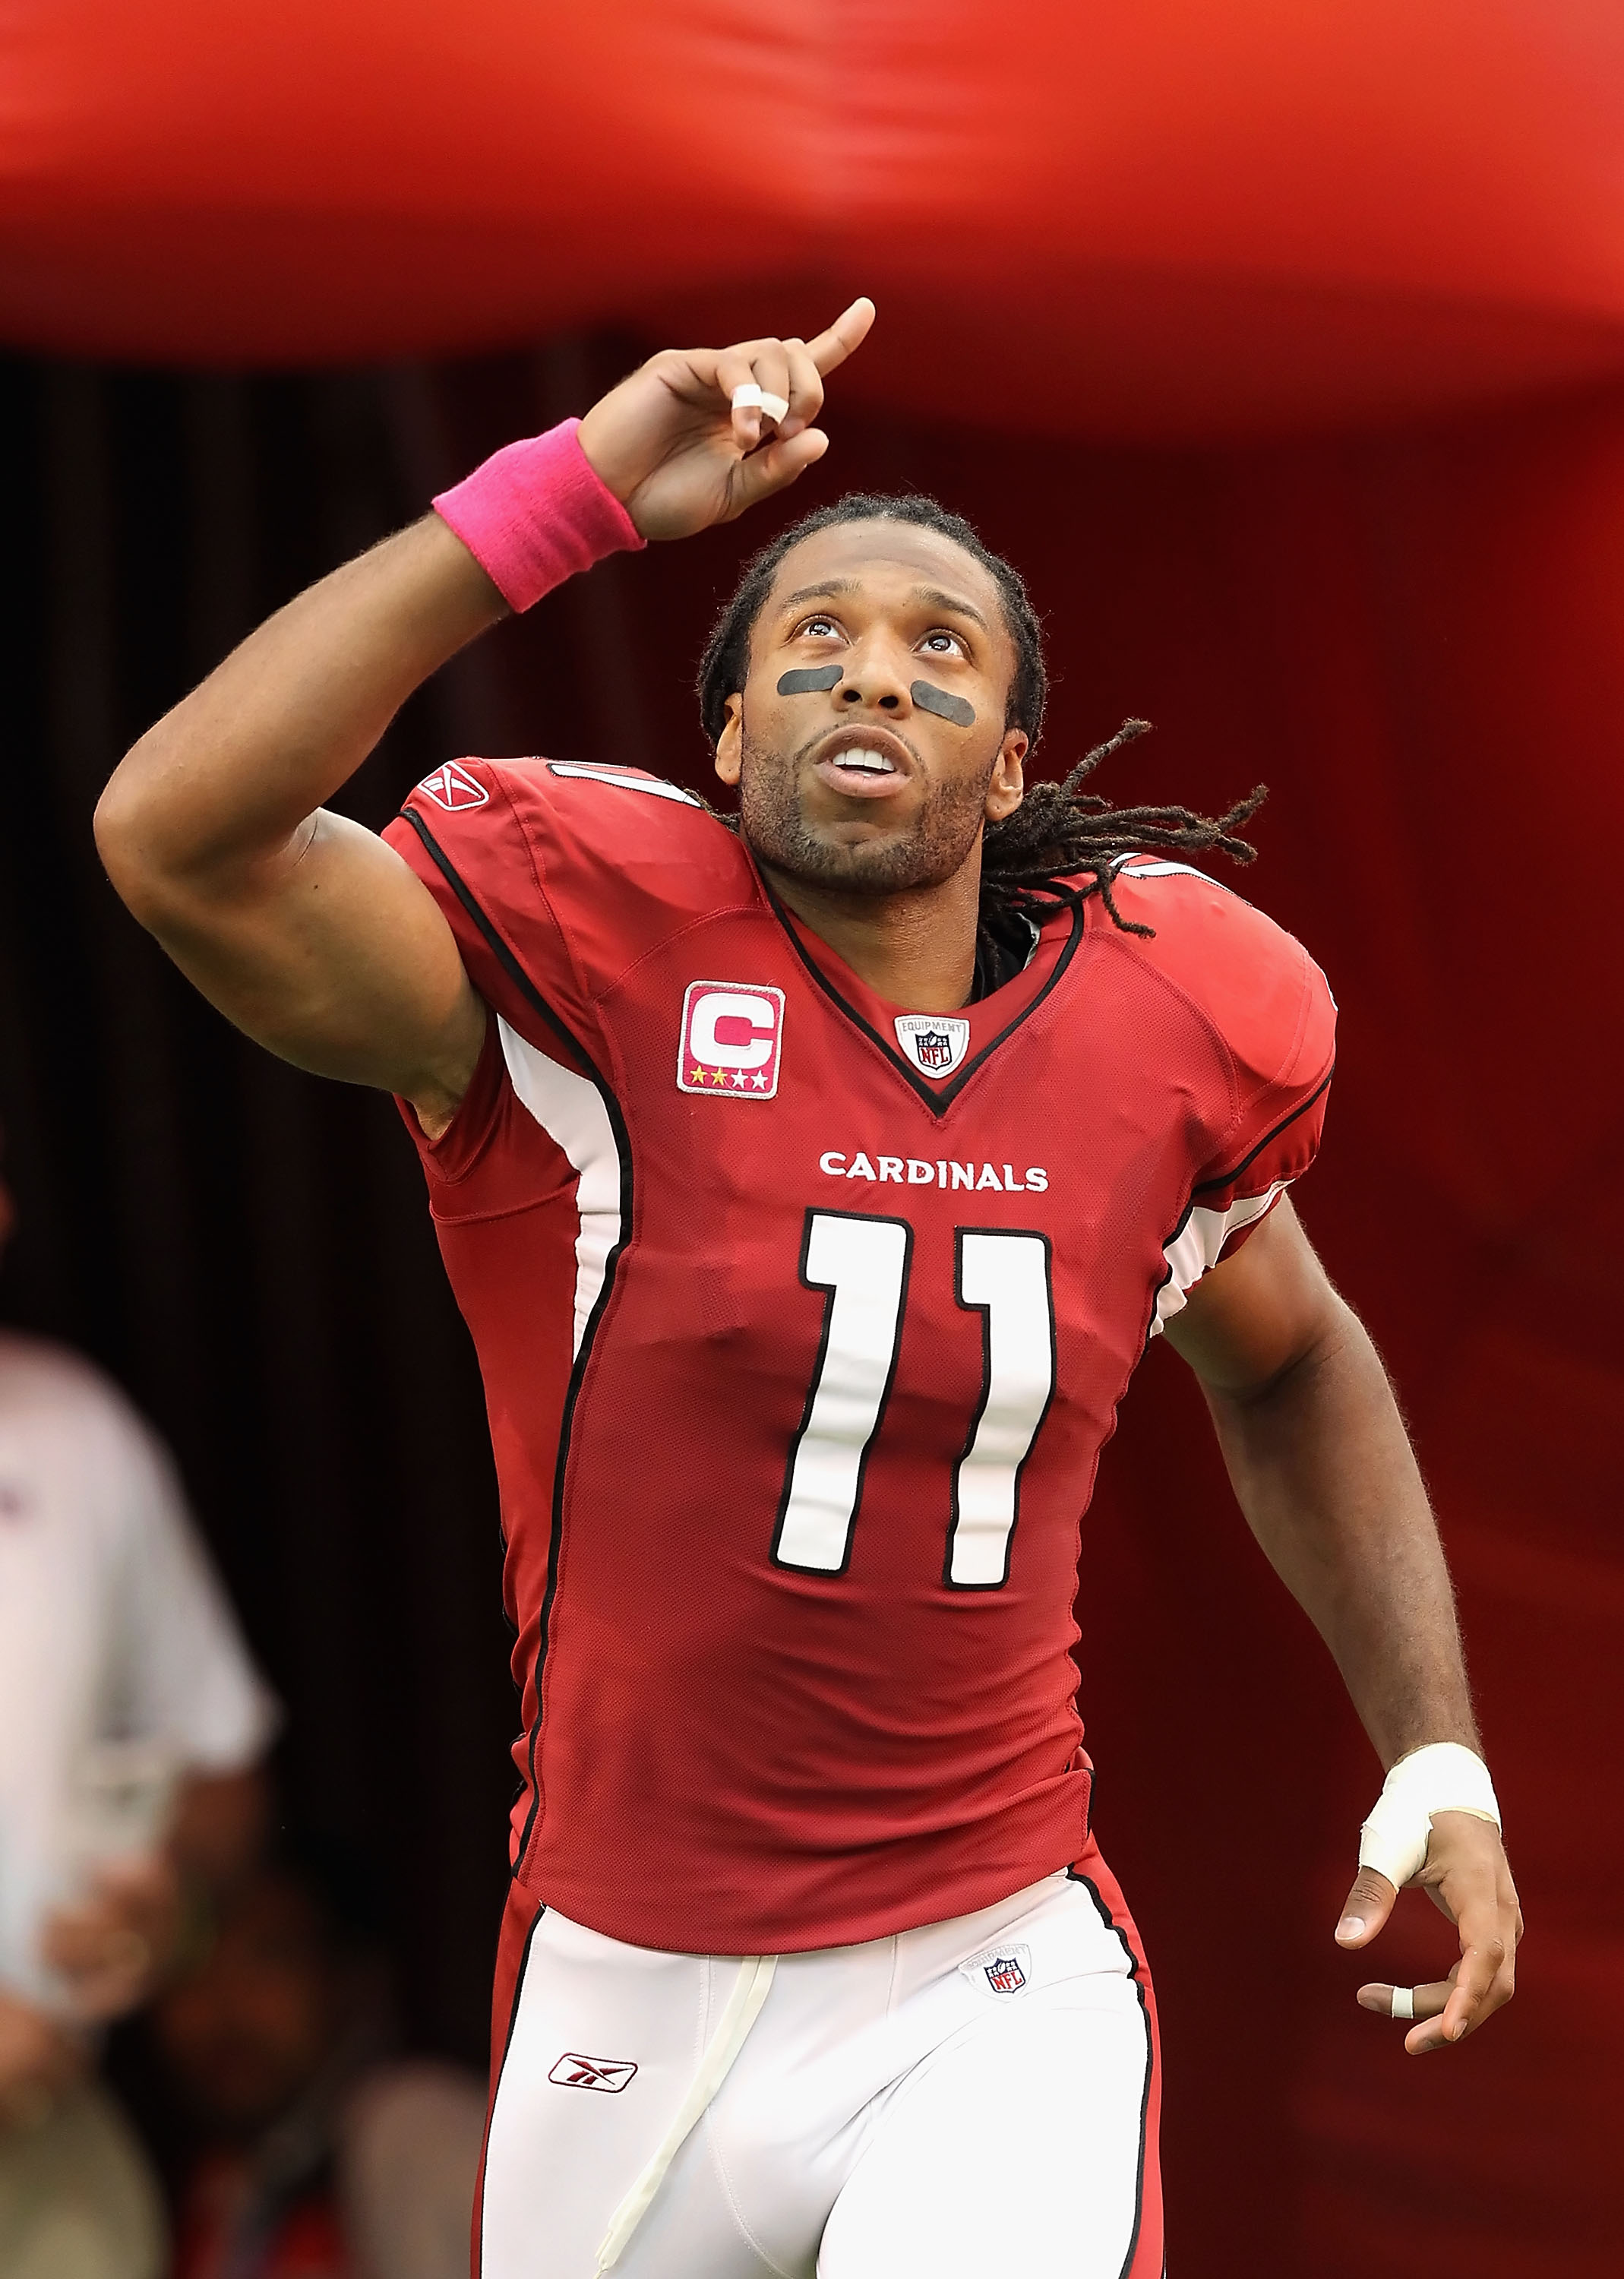 11 LARRY FITZGERALD Arizona Cardinals NFL WR Red Throwback Jersey